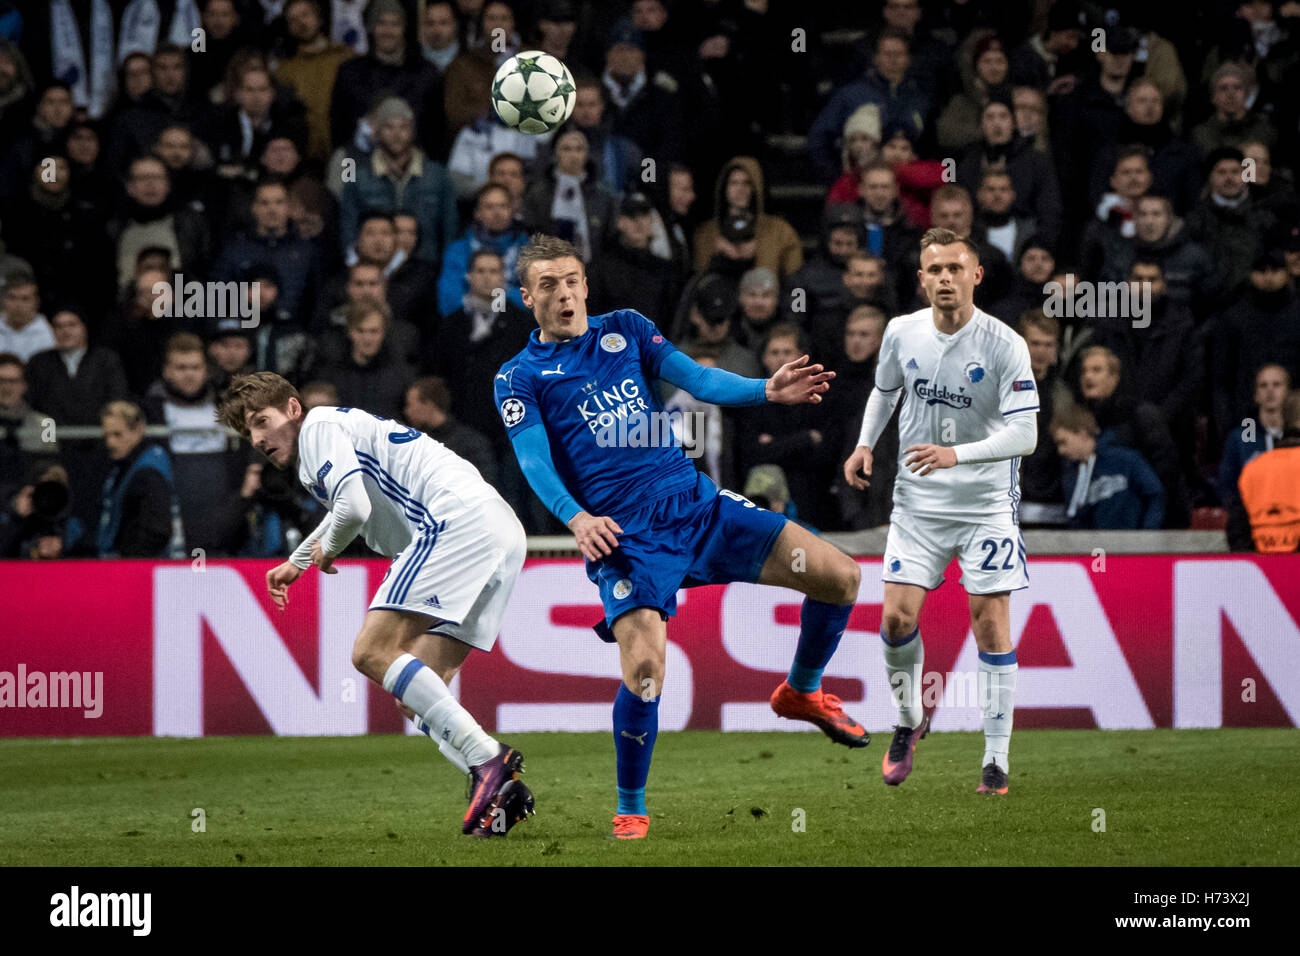 Denmark, Copenhagen, November 2nd 2016. Jamie Vardy (9) of Leicester City seen during the UEFA Champions League’s Group G match between FC Copenhagen and Leicester City at Telia Parken Stock Photo